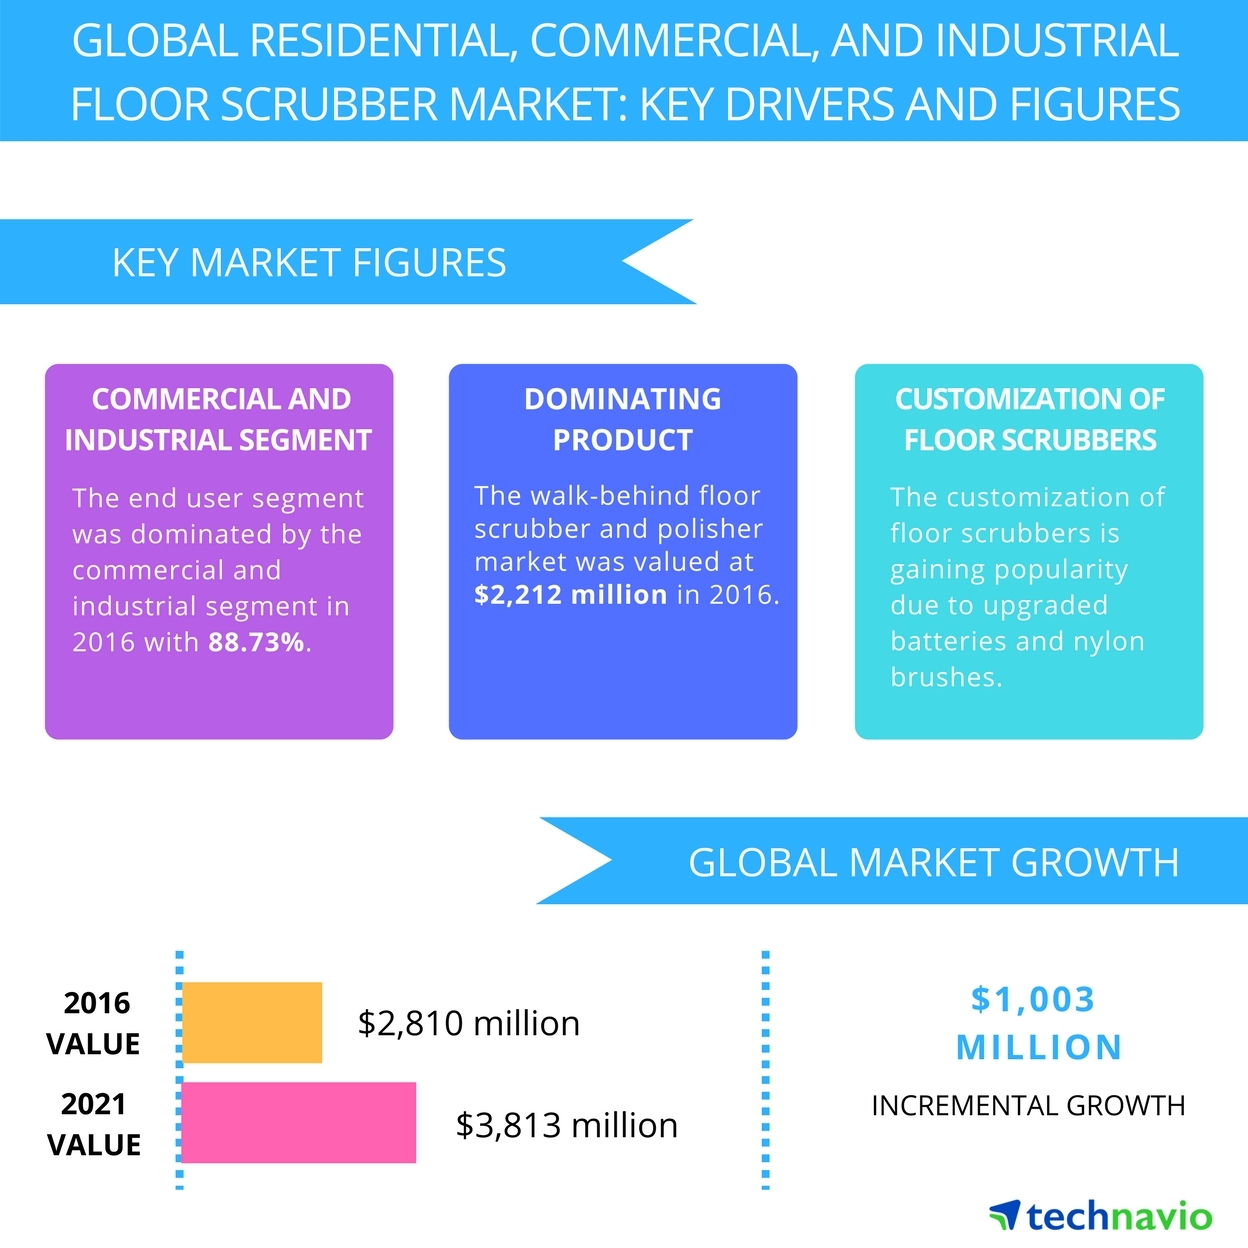 Top 5 Vendors In The Global Residential Commercial And